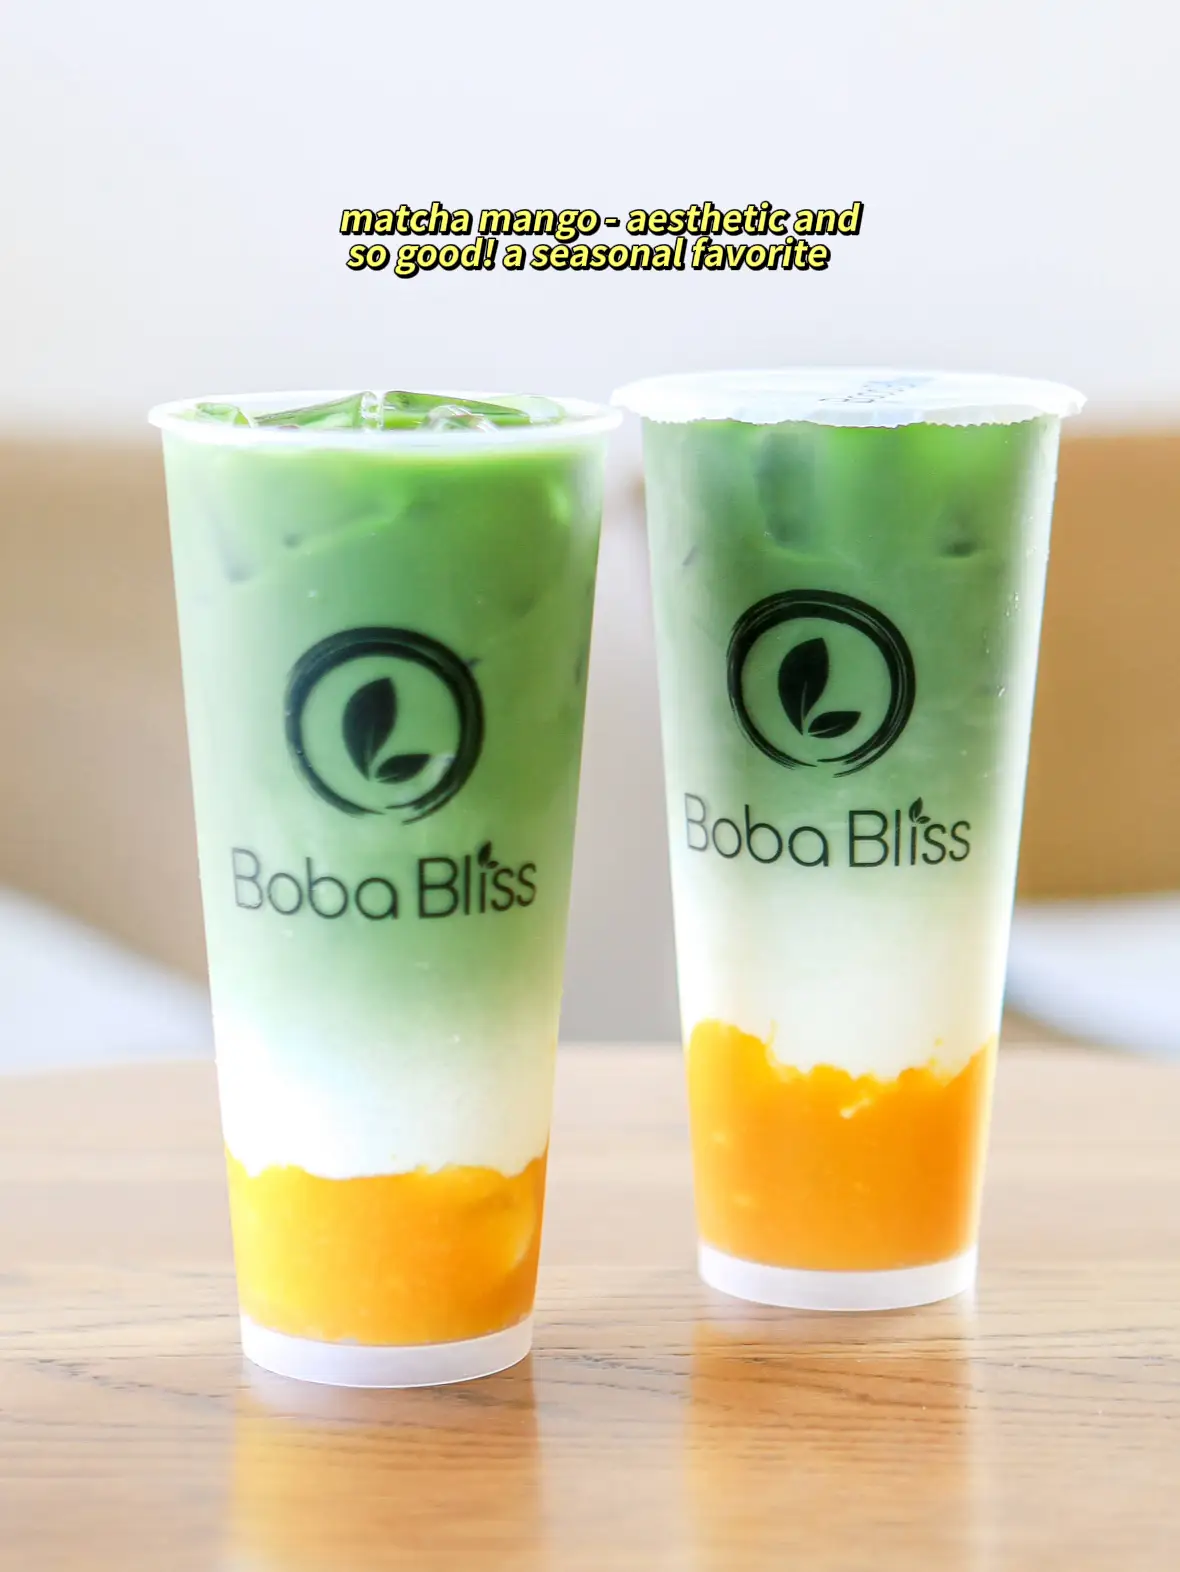 Indulge in Boba bliss